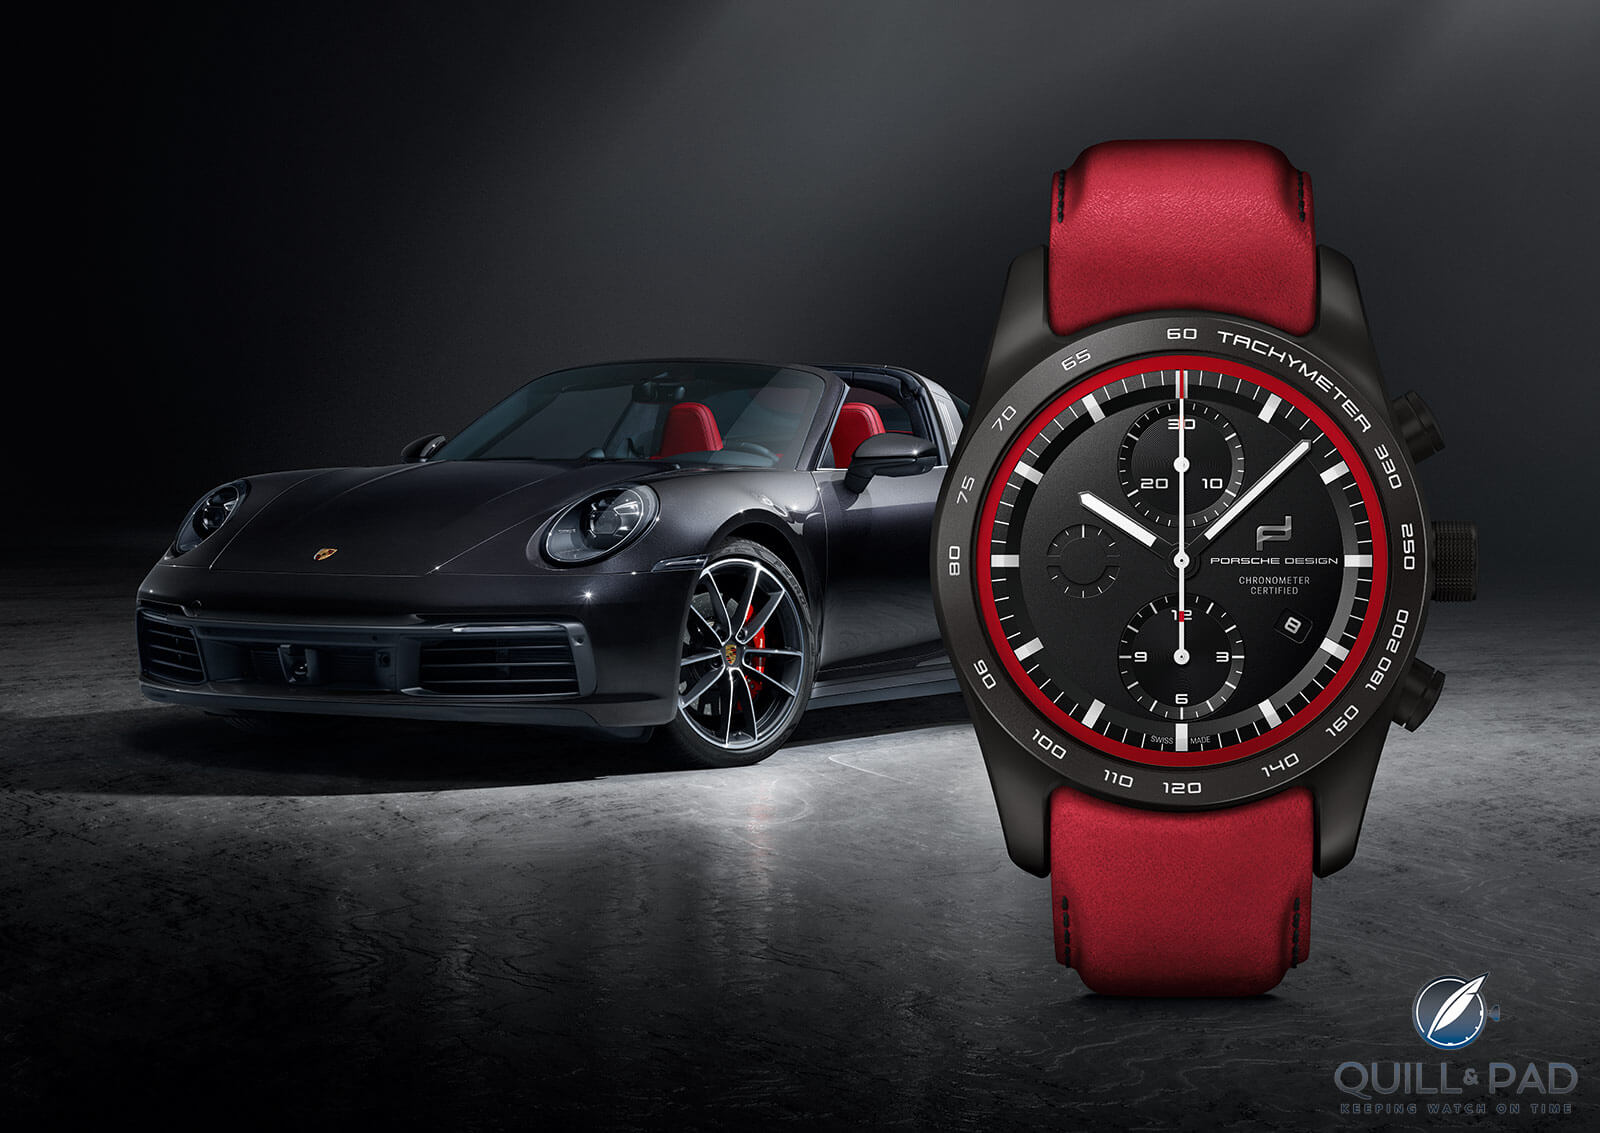 The Next Best Thing to a Game-Changing Porsche? A Watch Inspired